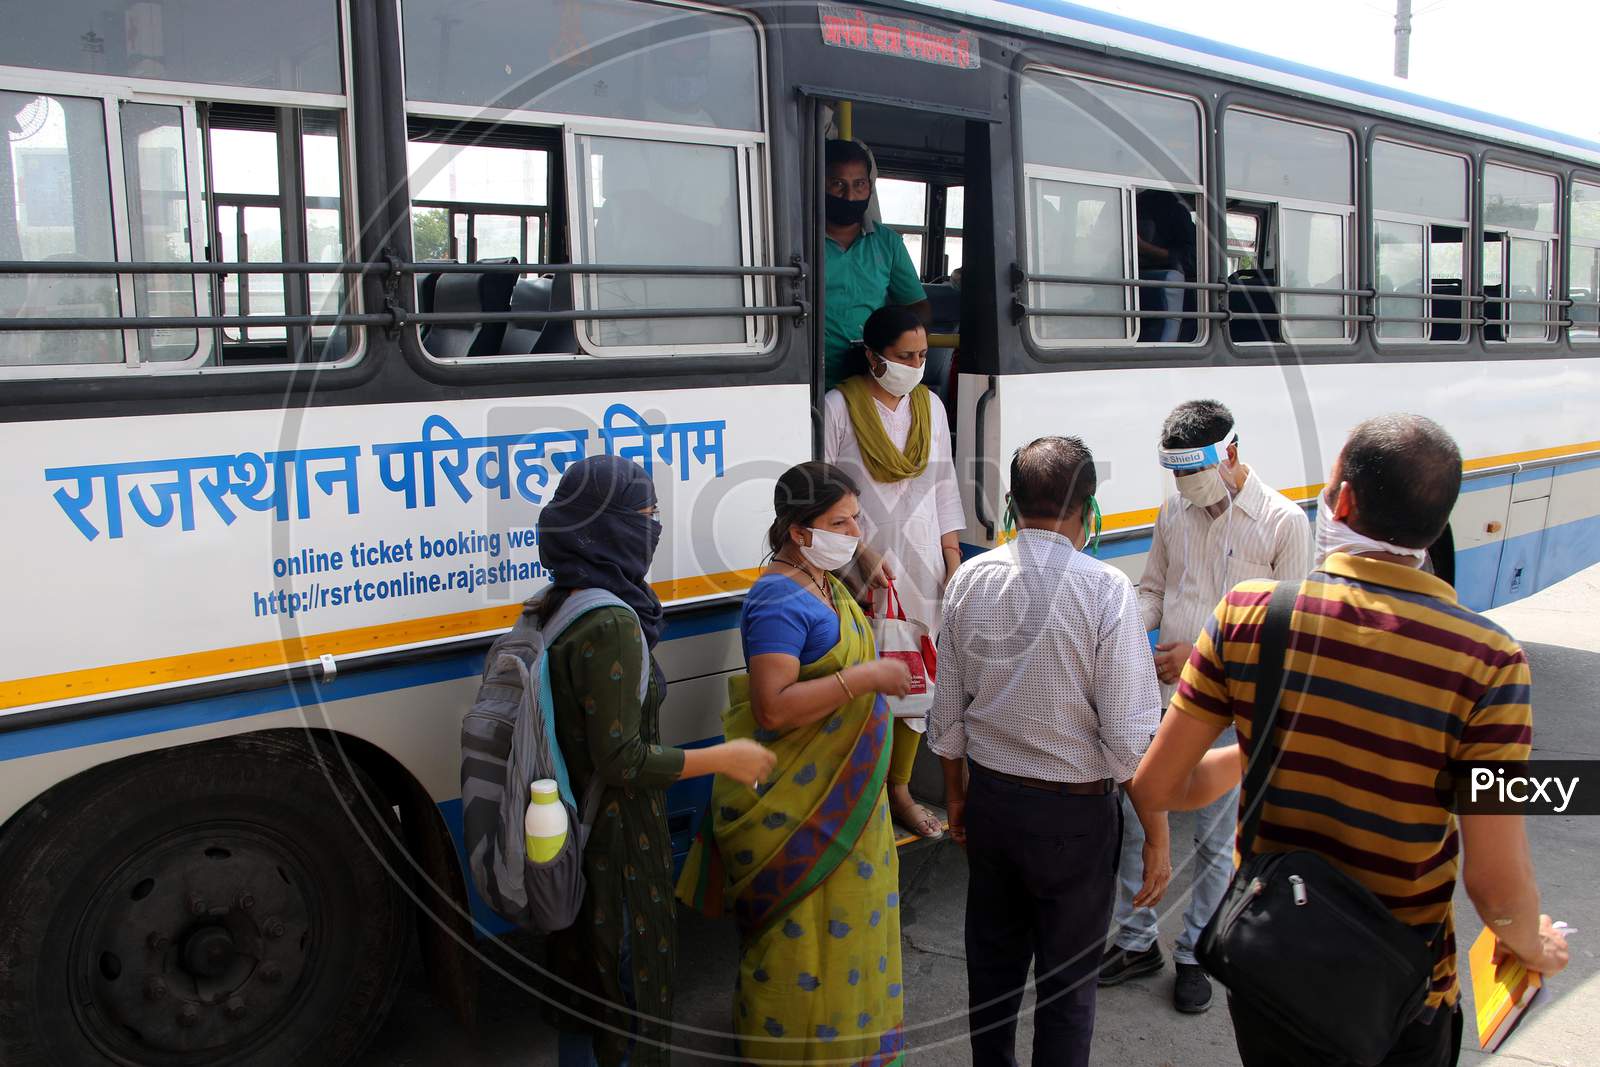 Passengers Undergo Thermal Screening As They De-Board A Public Bus Following Ease Of Restrictions, During The Fifth Phase Of Covid-19 Lockdown In Ajmer, Rajasthan, India On 03 June 2020.